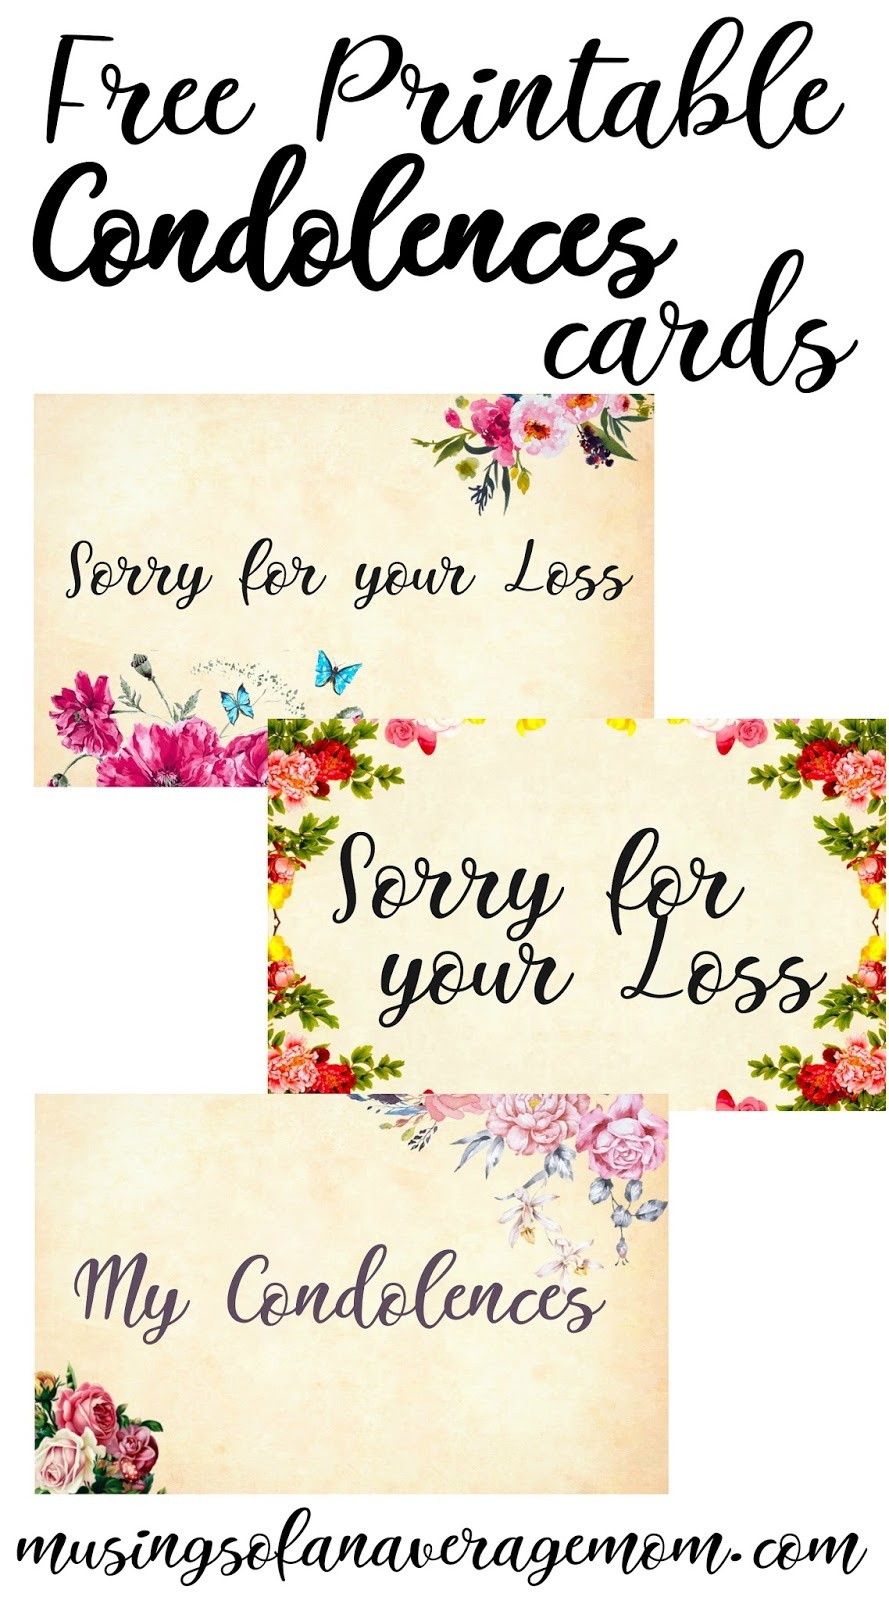 Musings Of An Average Mom: Condolences Cards - Free Printable Sympathy Cards